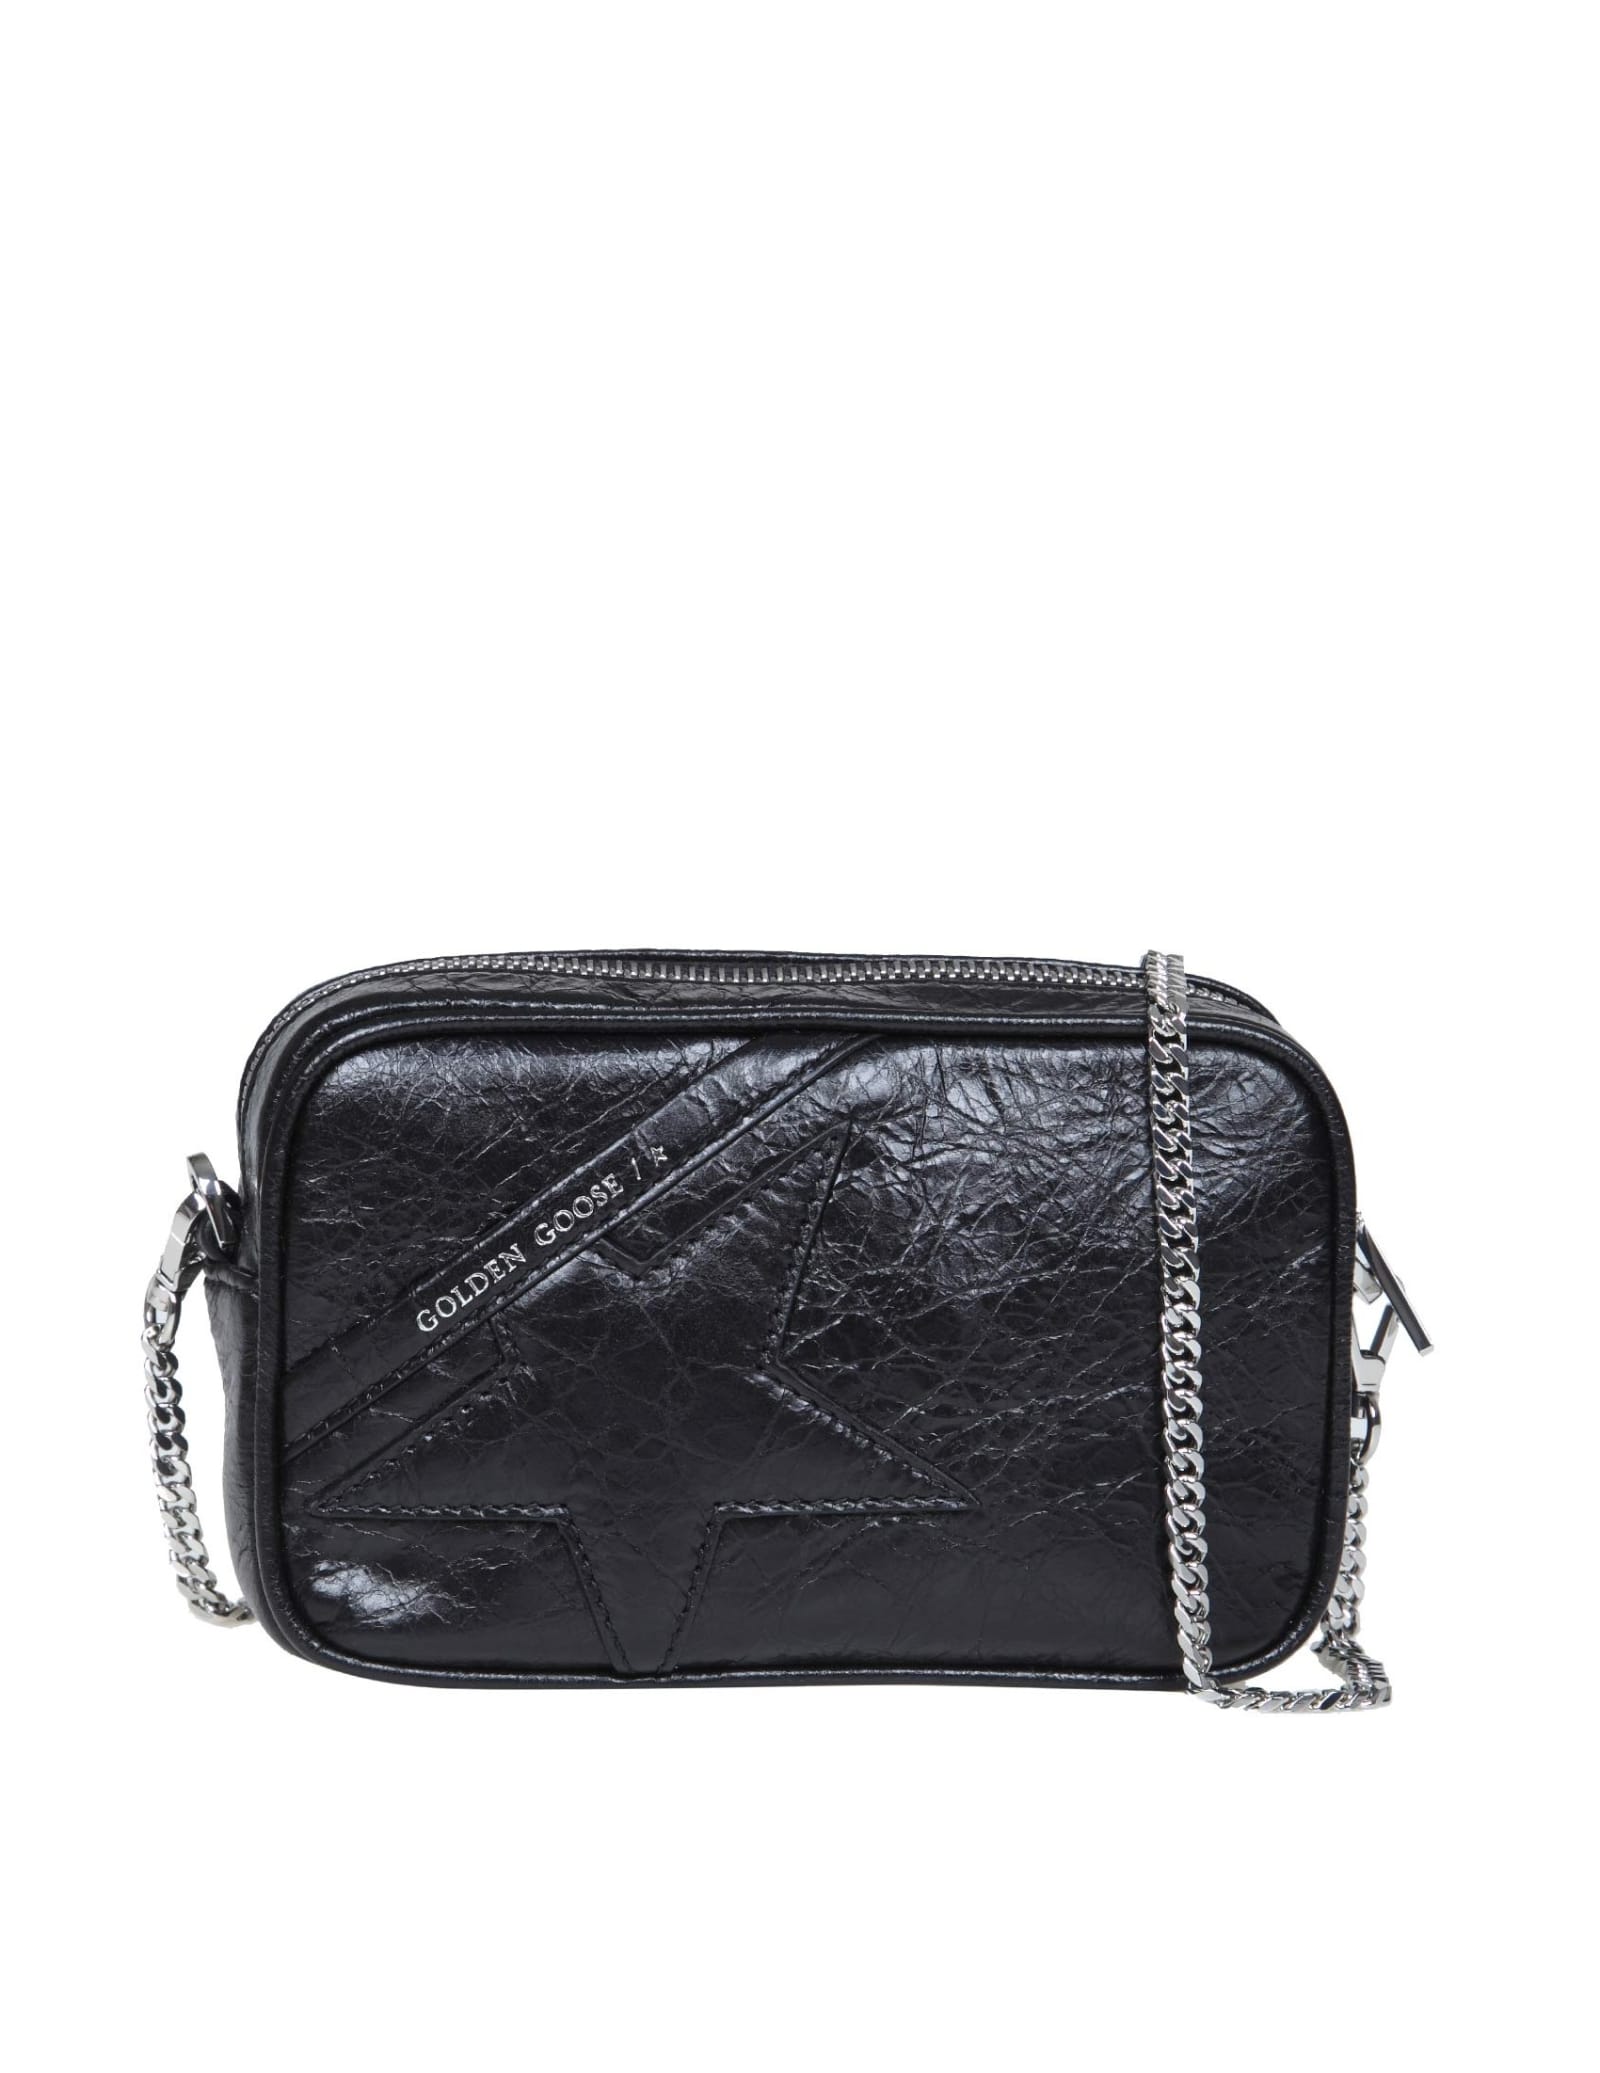 Golden Goose Mini Star Bag In Glossy Finish Leather